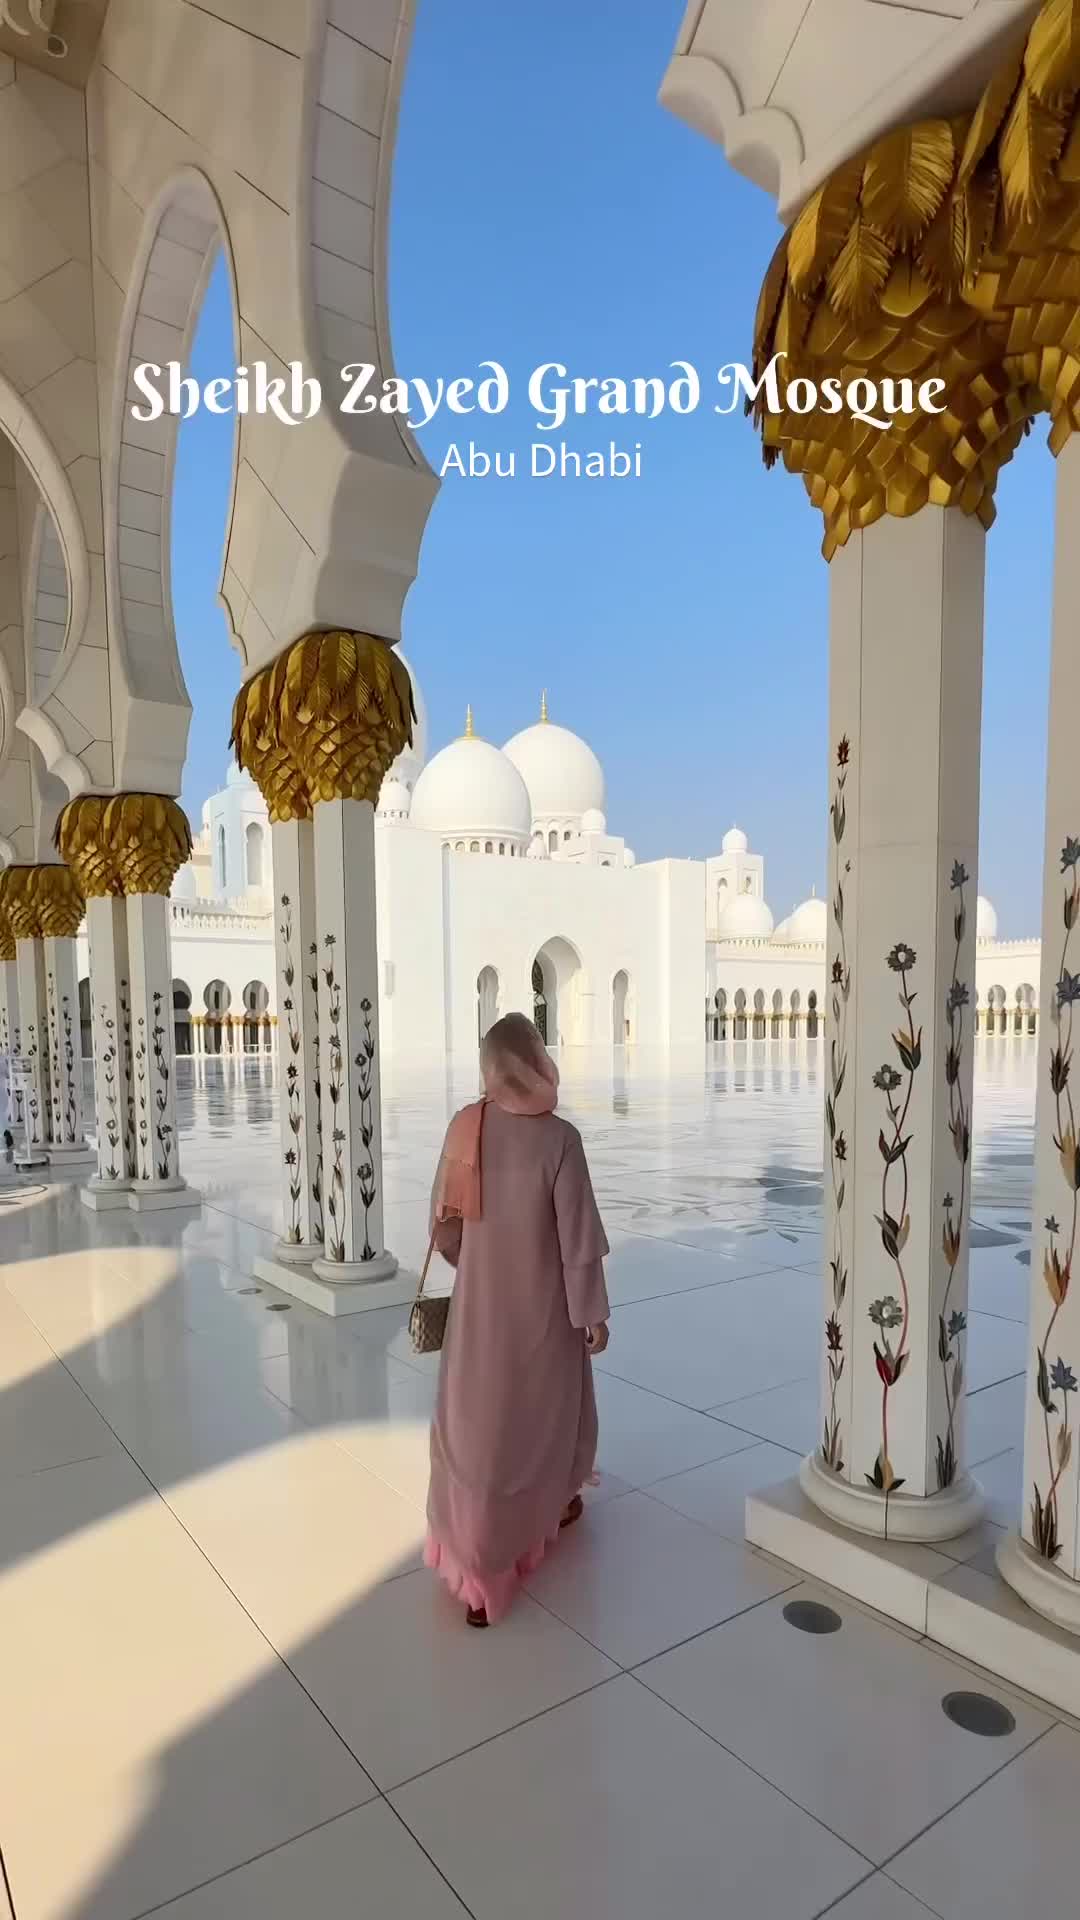 Discover the Sheikh Zayed Grand Mosque in Abu Dhabi